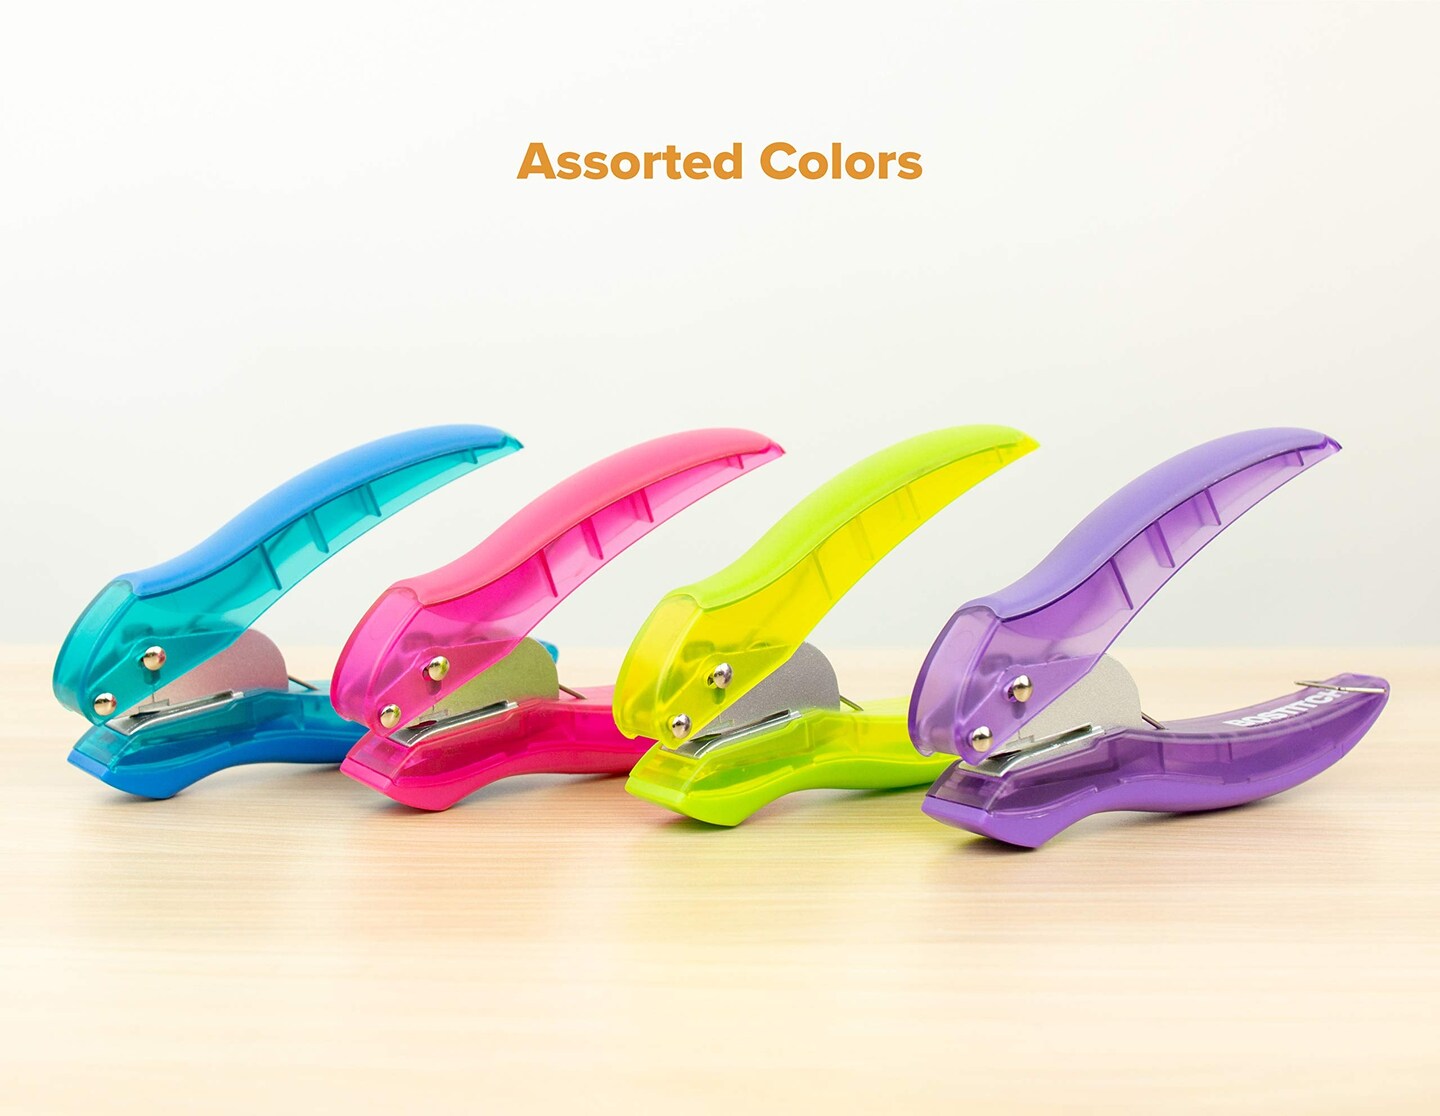 Bostitch Office inLIGHT Reduced Effort One-Hole Punch, One Unit per Package, Assorted Colors, No Color Choice (2401)